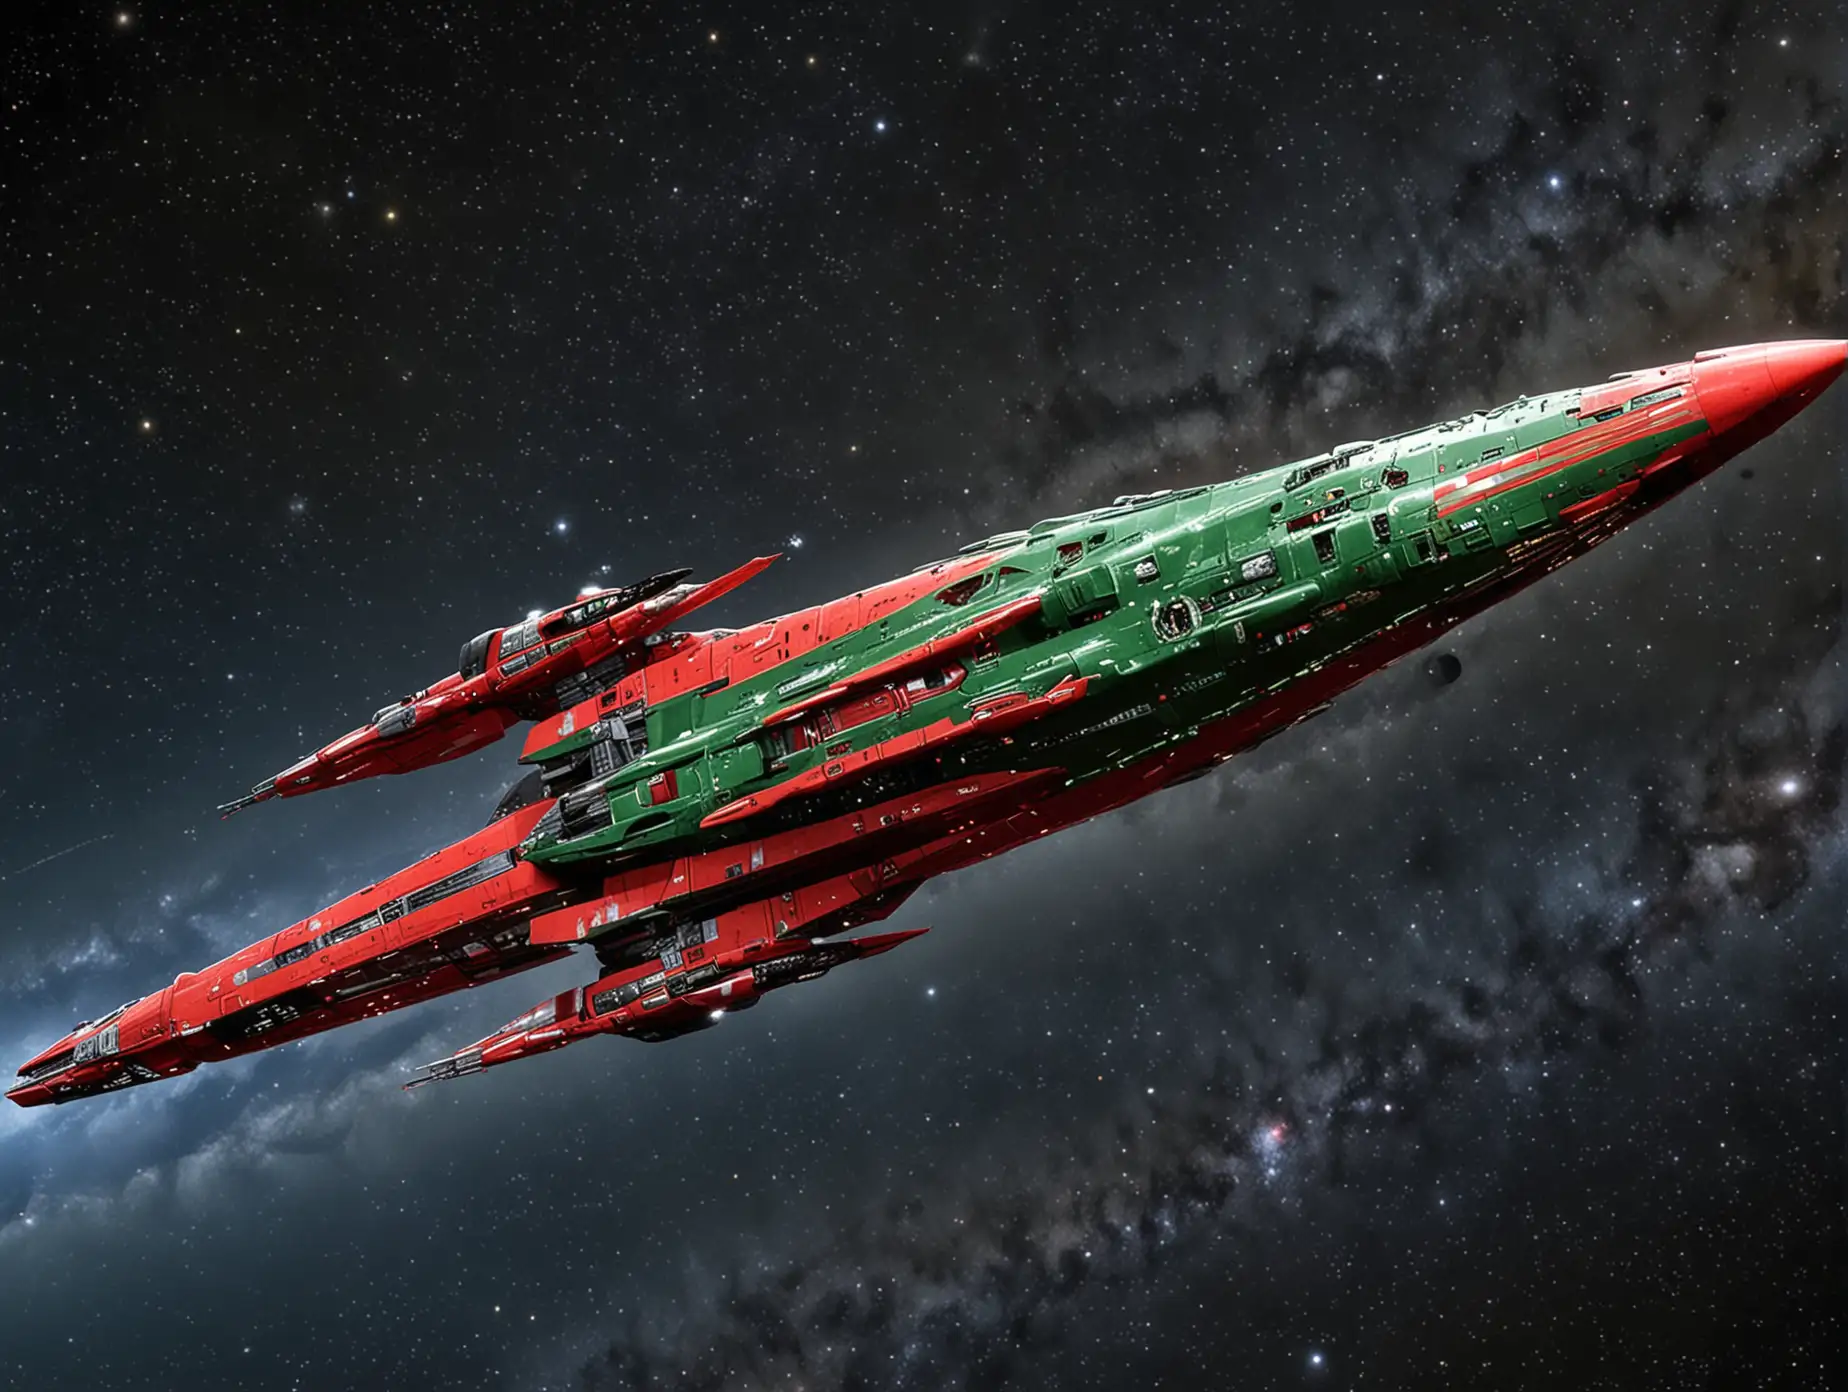 Futuristic-Starship-with-TripleStriped-Body-Striking-Red-Green-and-Red-Design